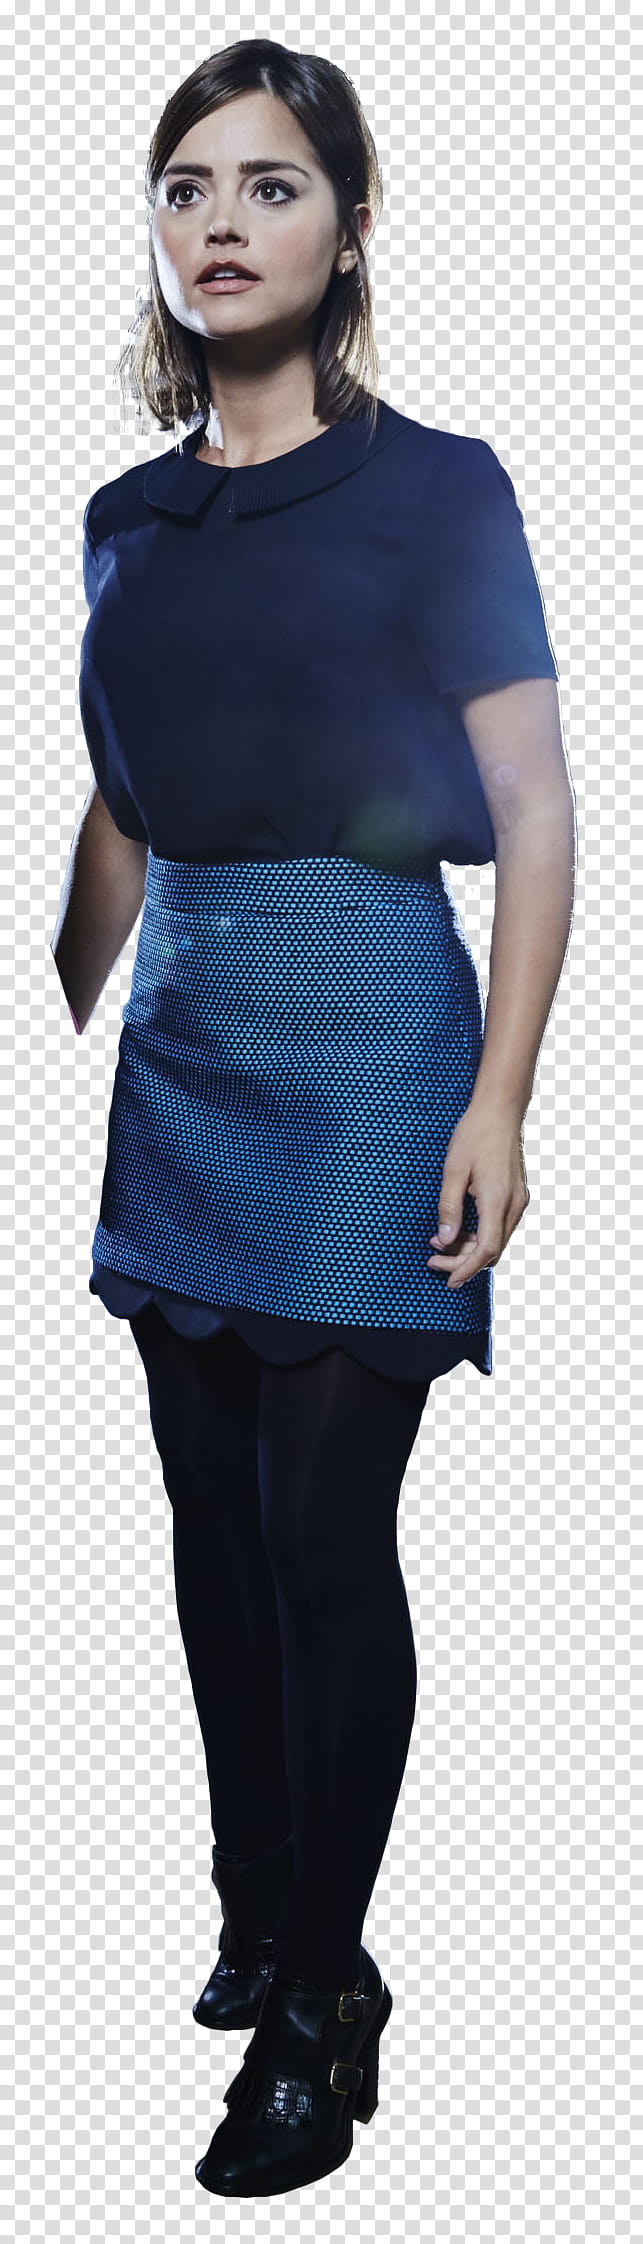 Jenna Coleman, woman wearing blue collared shirt transparent background PNG clipart